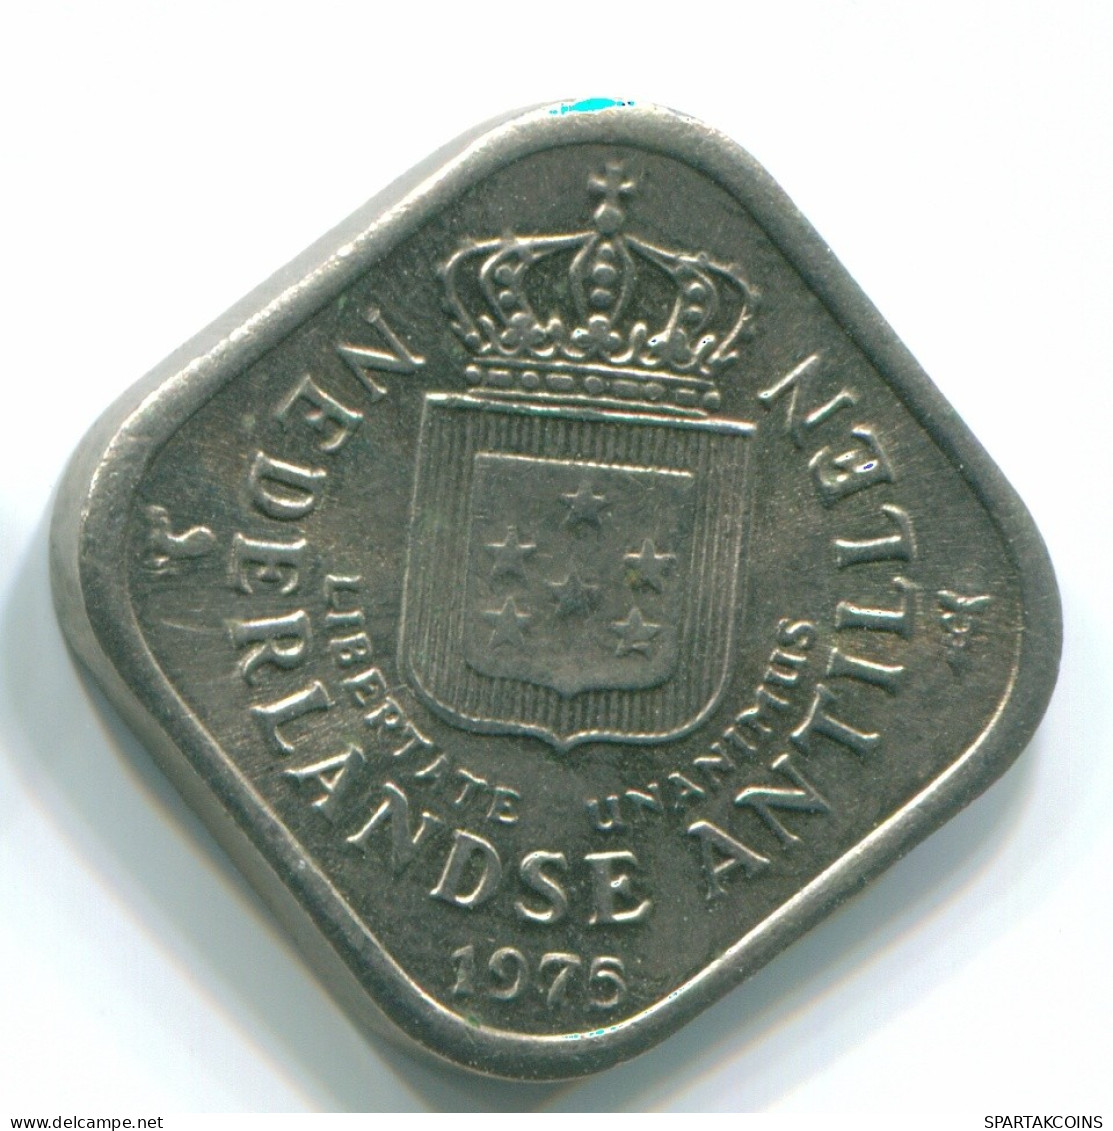 5 CENTS 1975 NETHERLANDS ANTILLES Nickel Colonial Coin #S12257.U.A - Netherlands Antilles